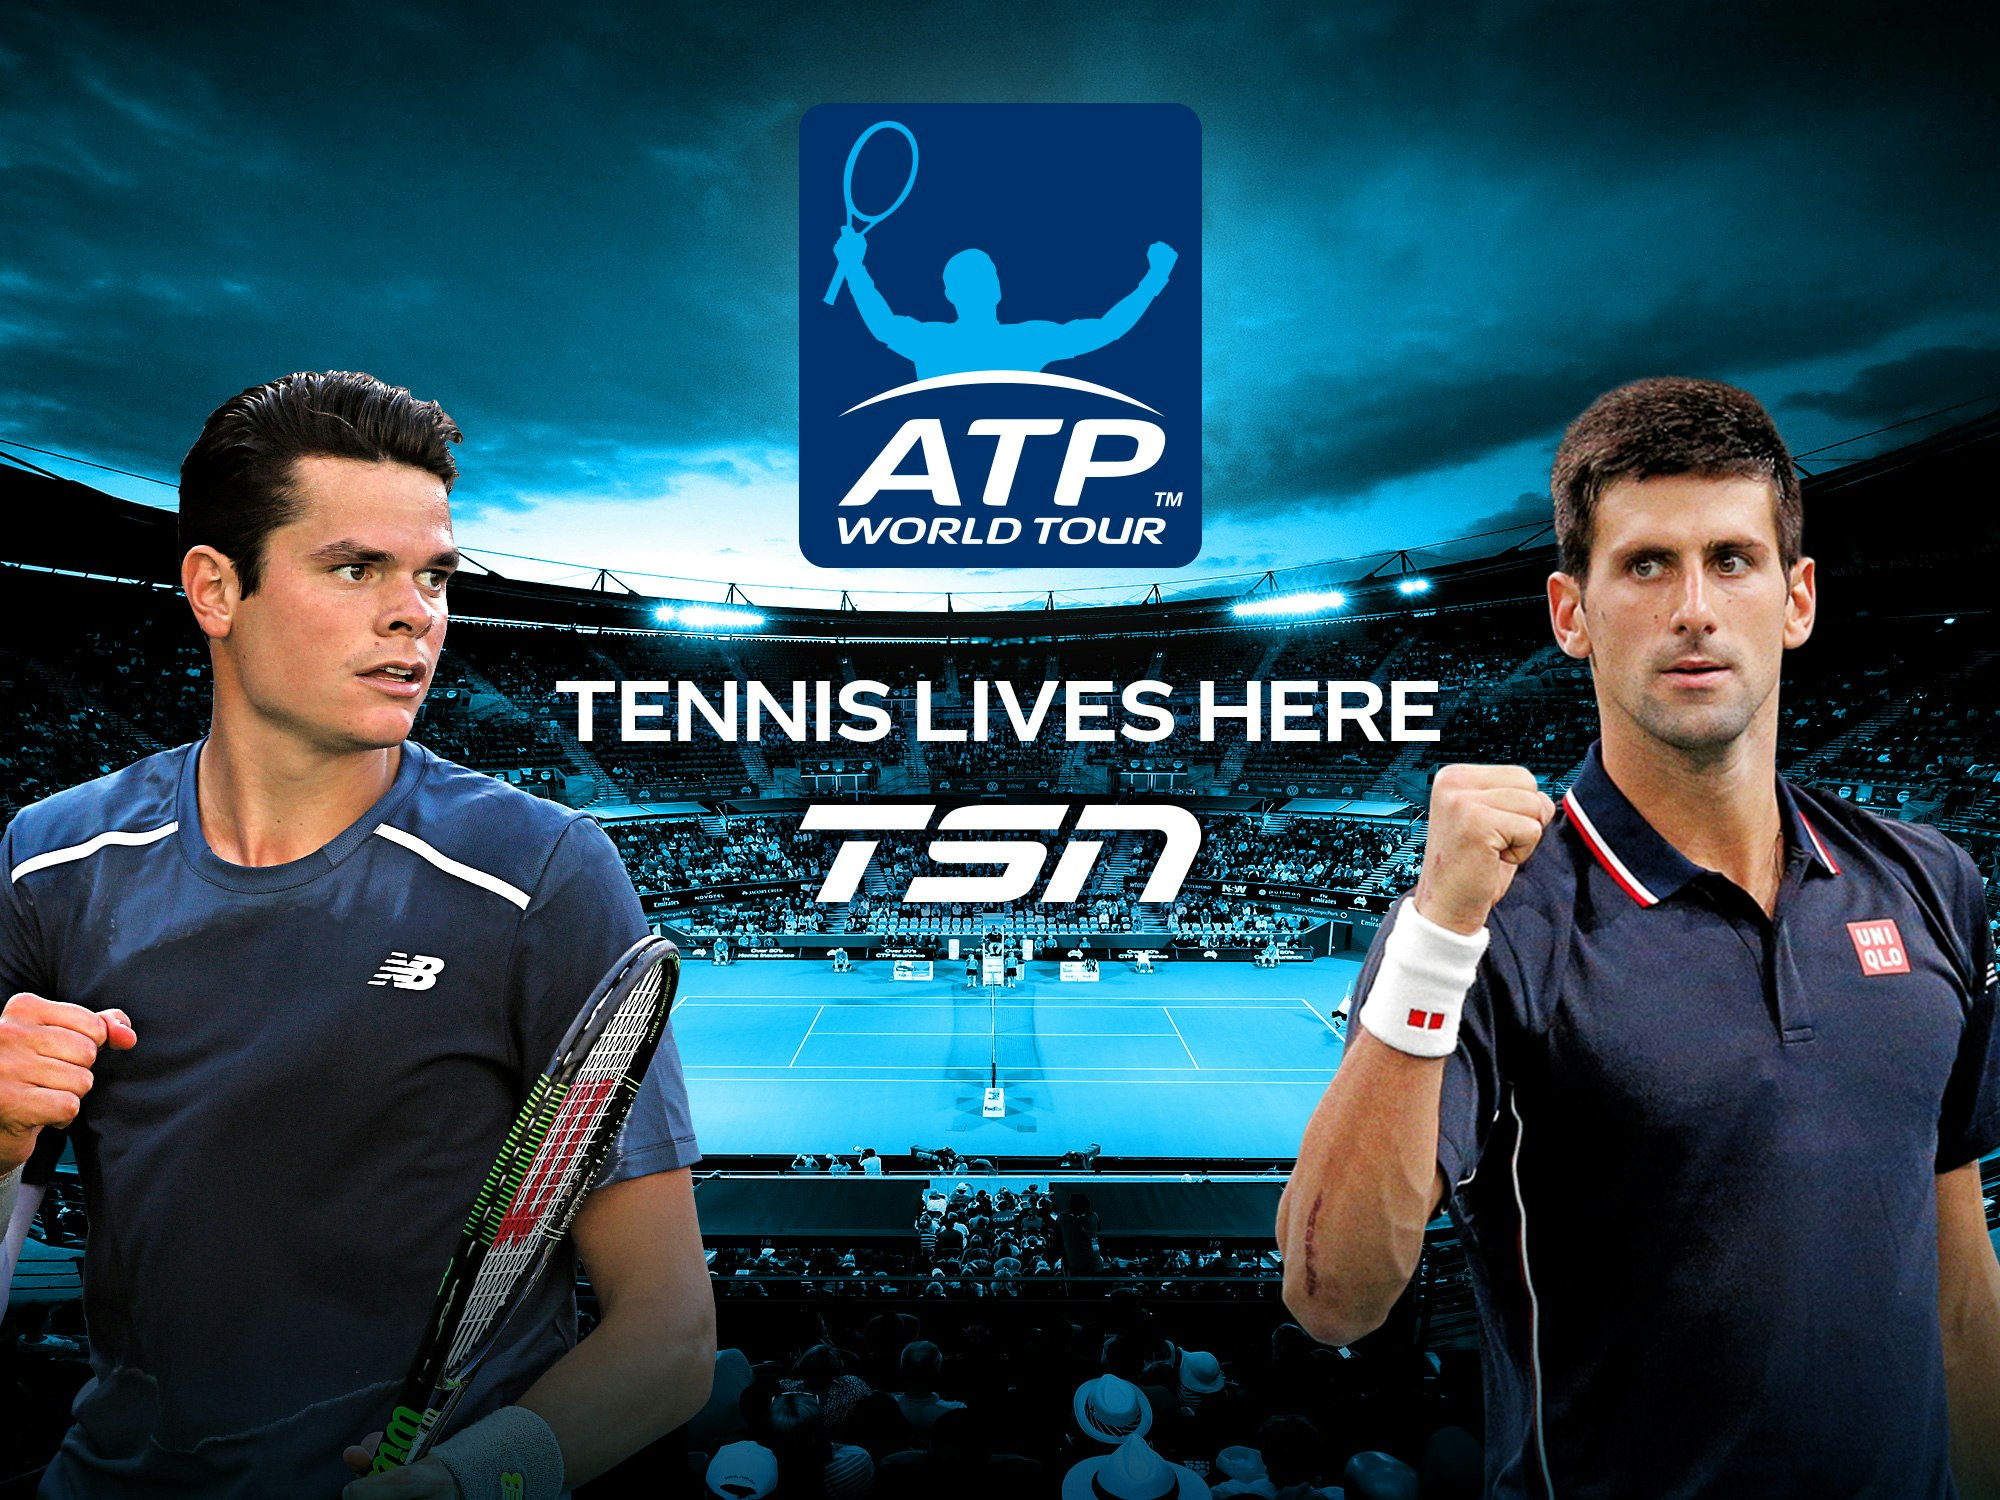 TSN Confirms Massive Slate of ATP Tennis Coverage, Kicking Off with ABN AMRO WORLD TENNIS TOURNAMENT from Rotterdam, Beginning Today